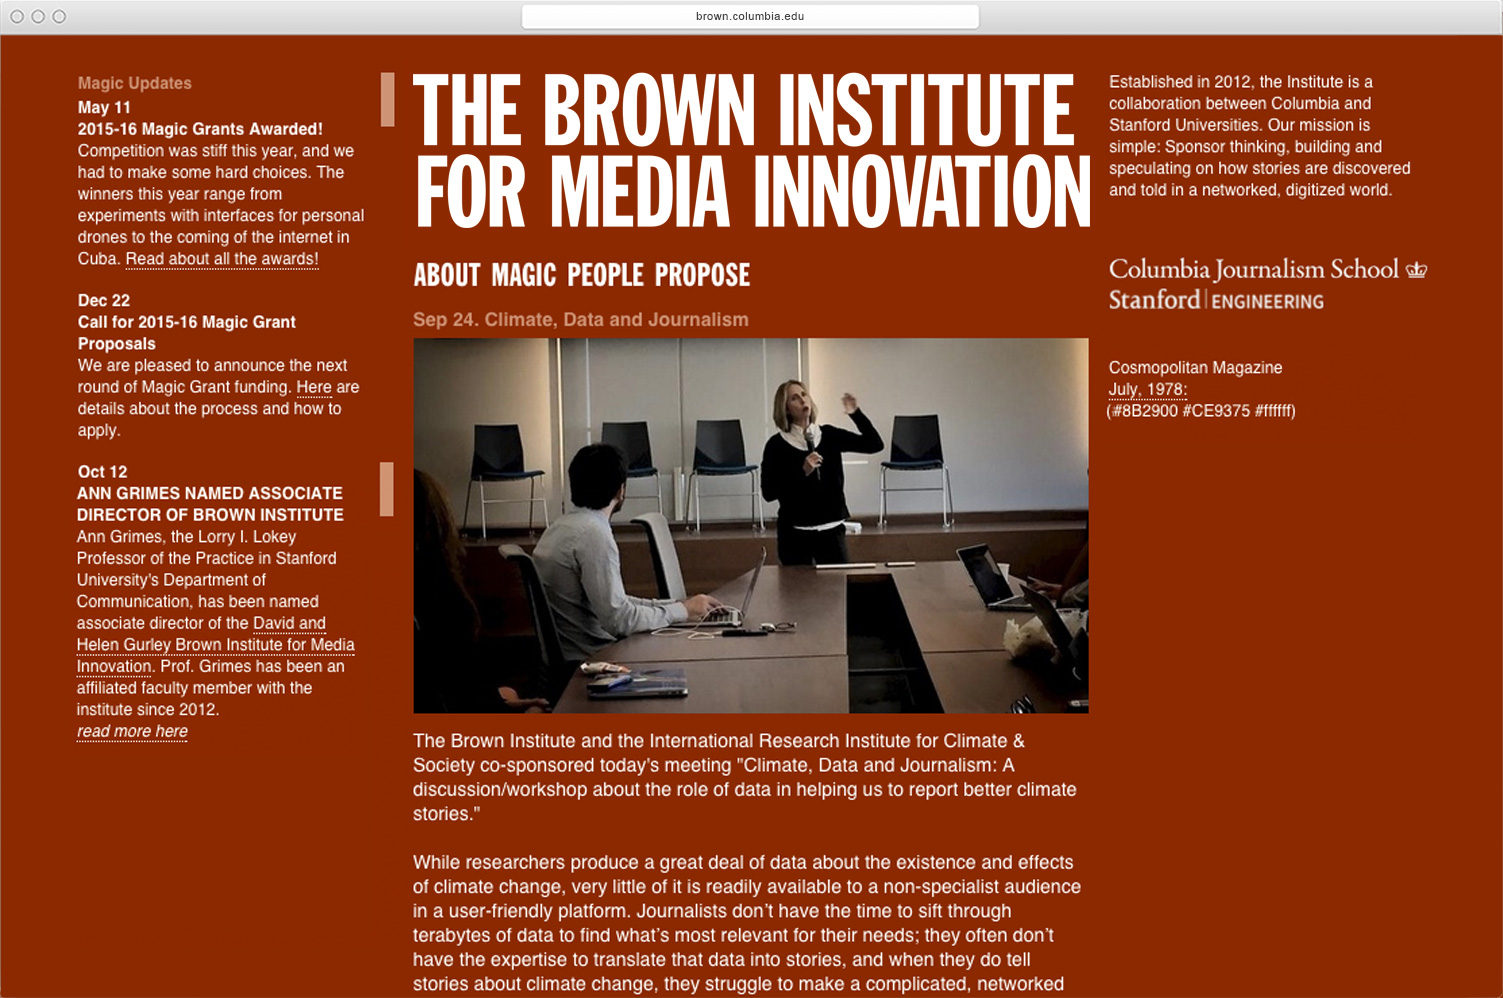 Brown Institute for Media Innovation identity and website  - MTWTF